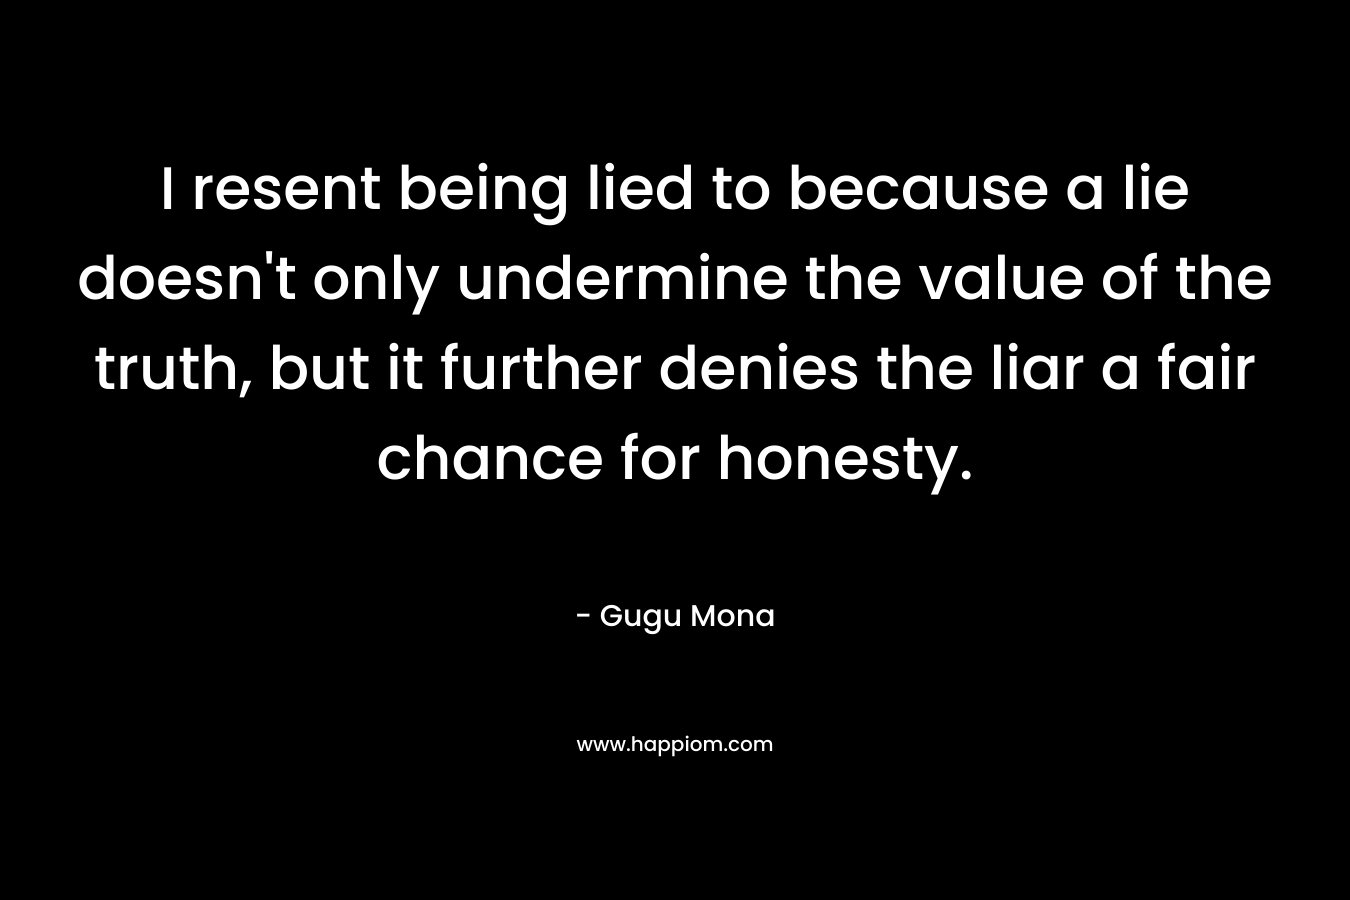 I resent being lied to because a lie doesn't only undermine the value of the truth, but it further denies the liar a fair chance for honesty.